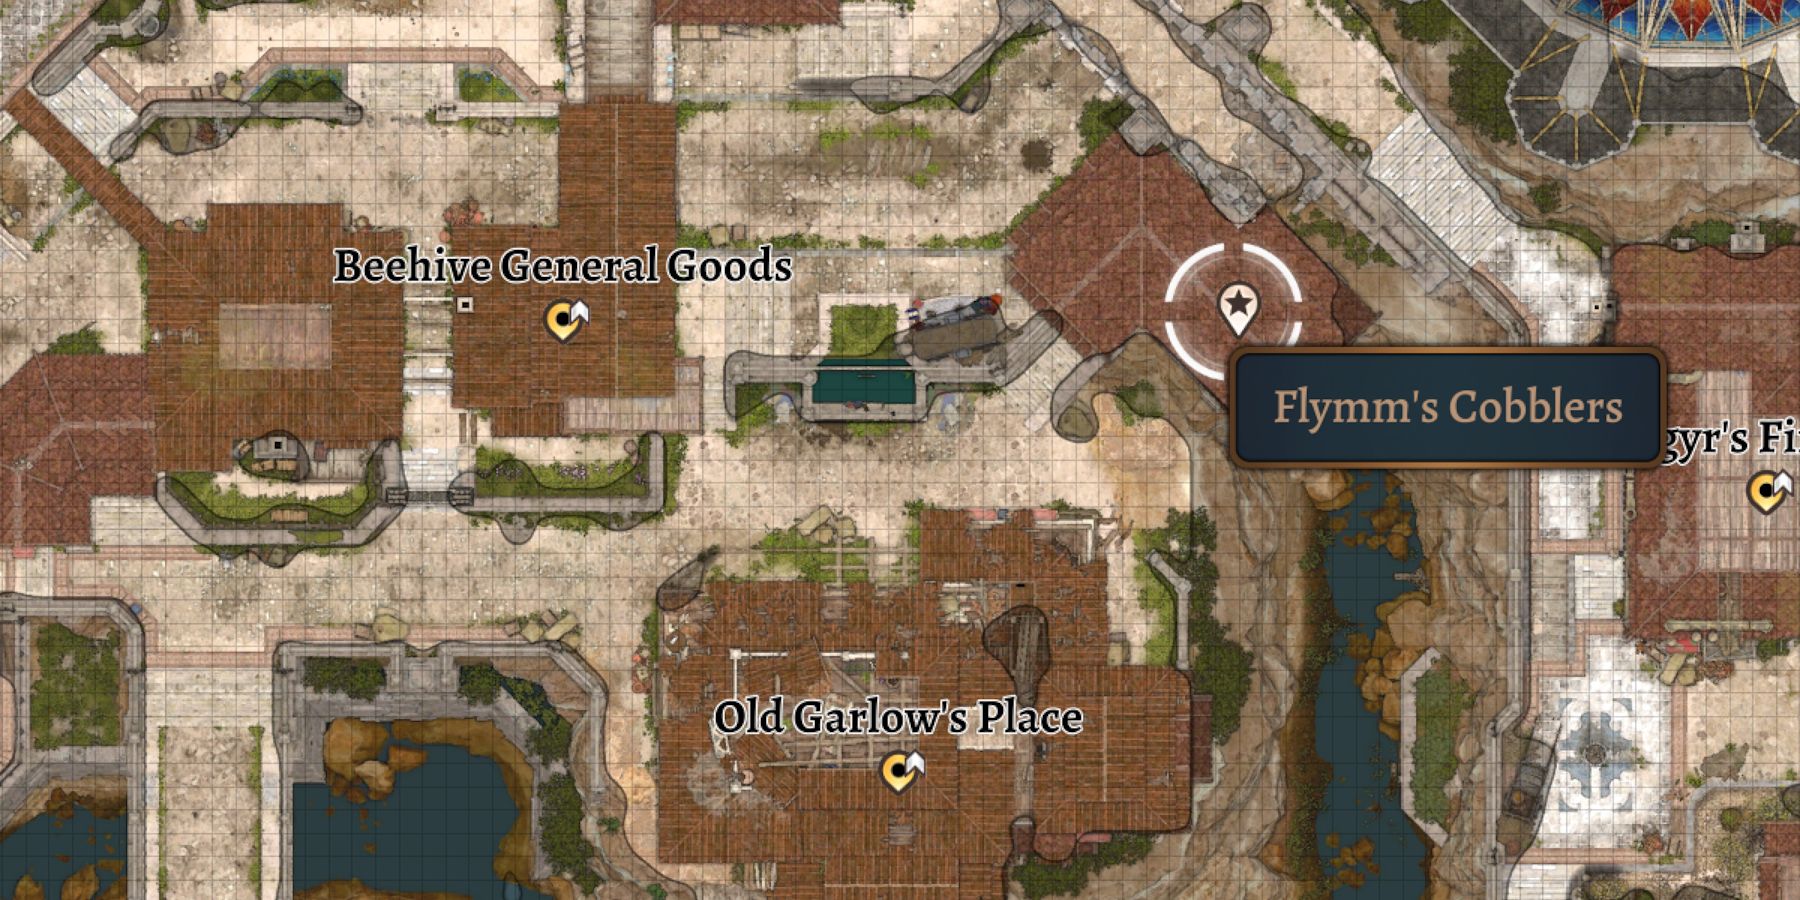 Flymm's Cobblers is labeled on the map